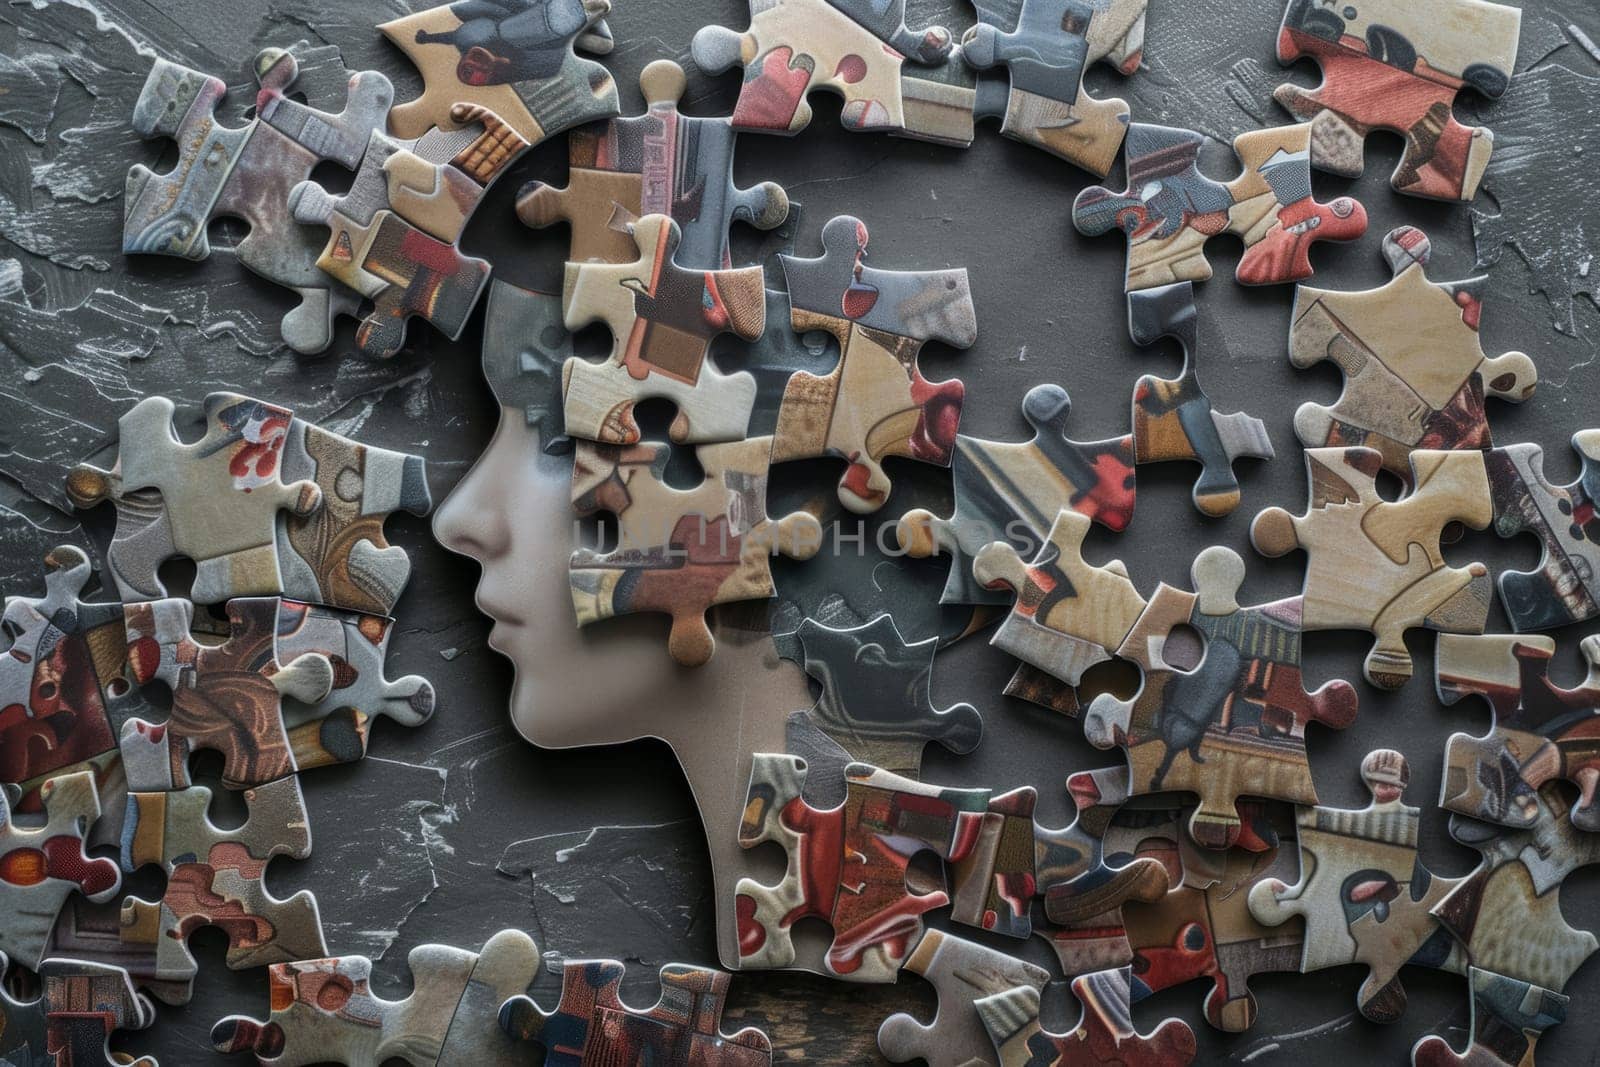 A completed puzzle in the silhouette of a human head with a colorful, abstract design on a dark, cracked background